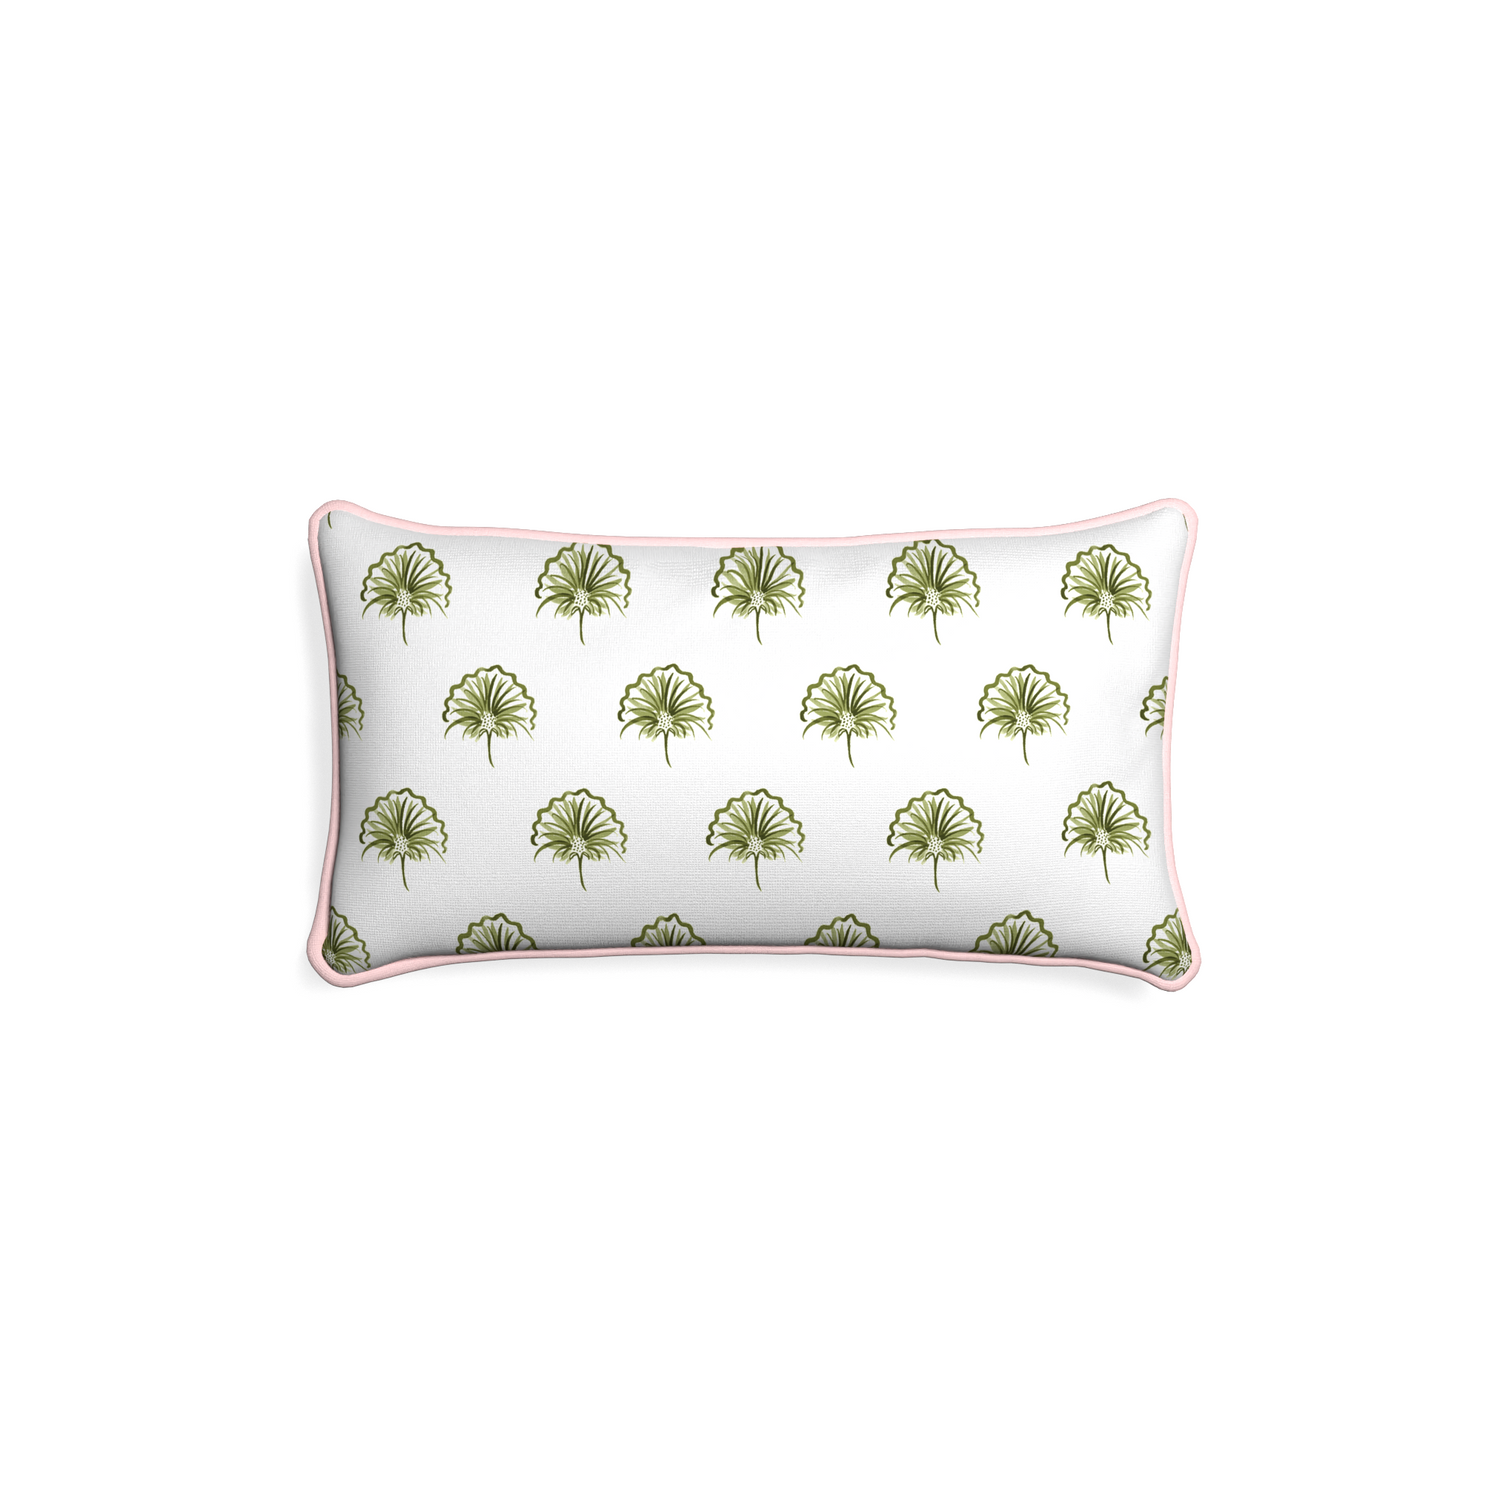 Petite-lumbar penelope moss custom green floralpillow with petal piping on white background